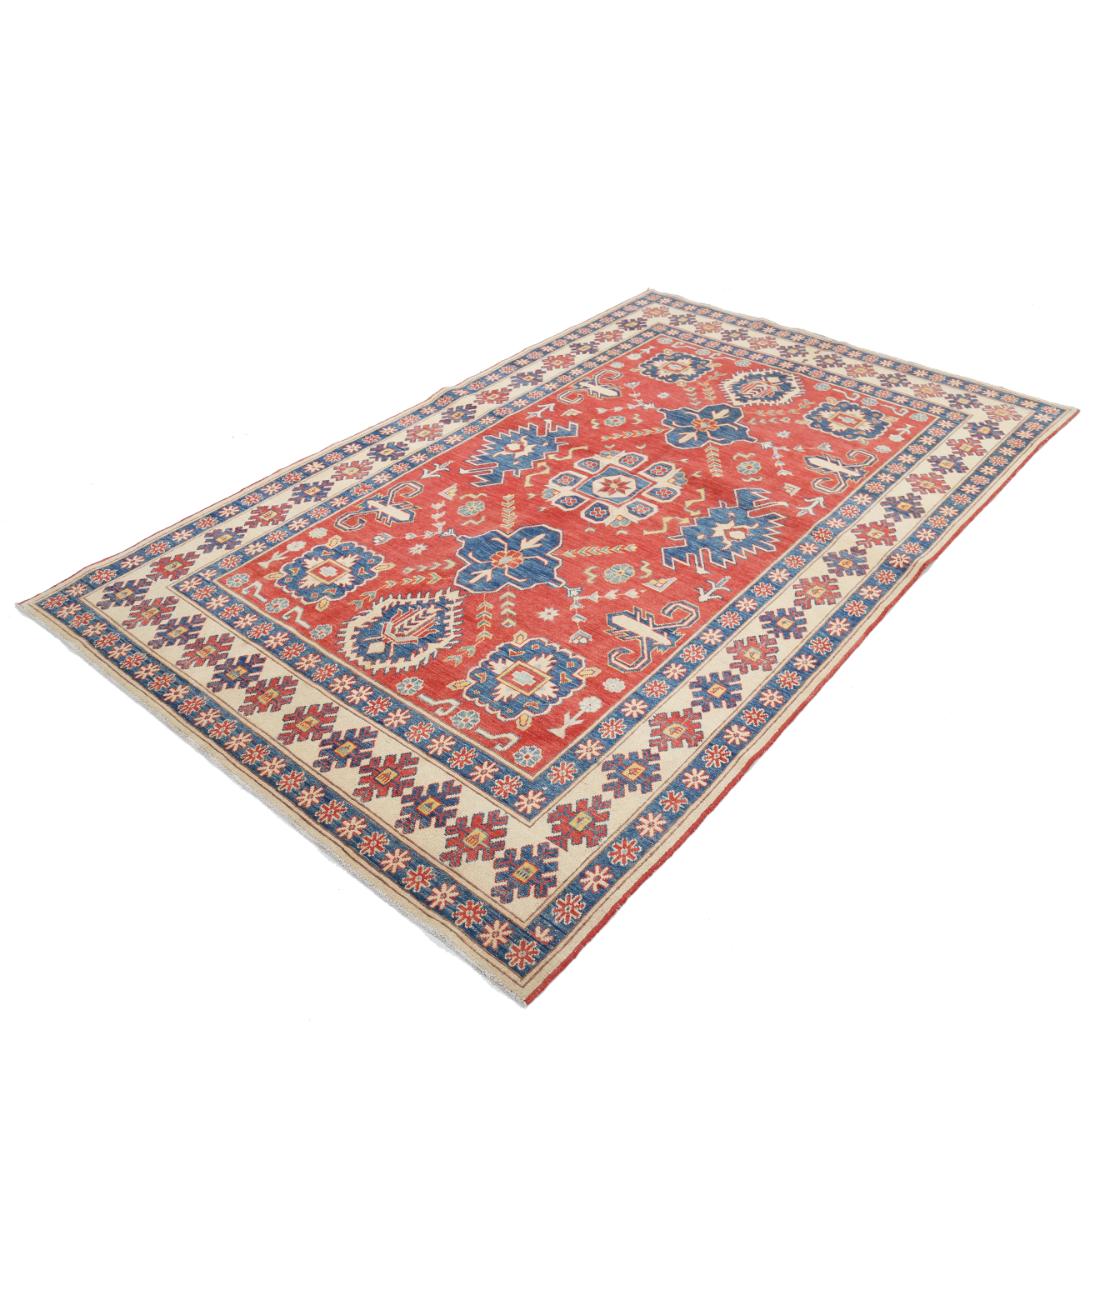 Hand Knotted Tribal Kazak Wool Rug - 5'6'' x 8'10'' 5' 6" X 8' 10" (168 X 269) / Red / Ivory